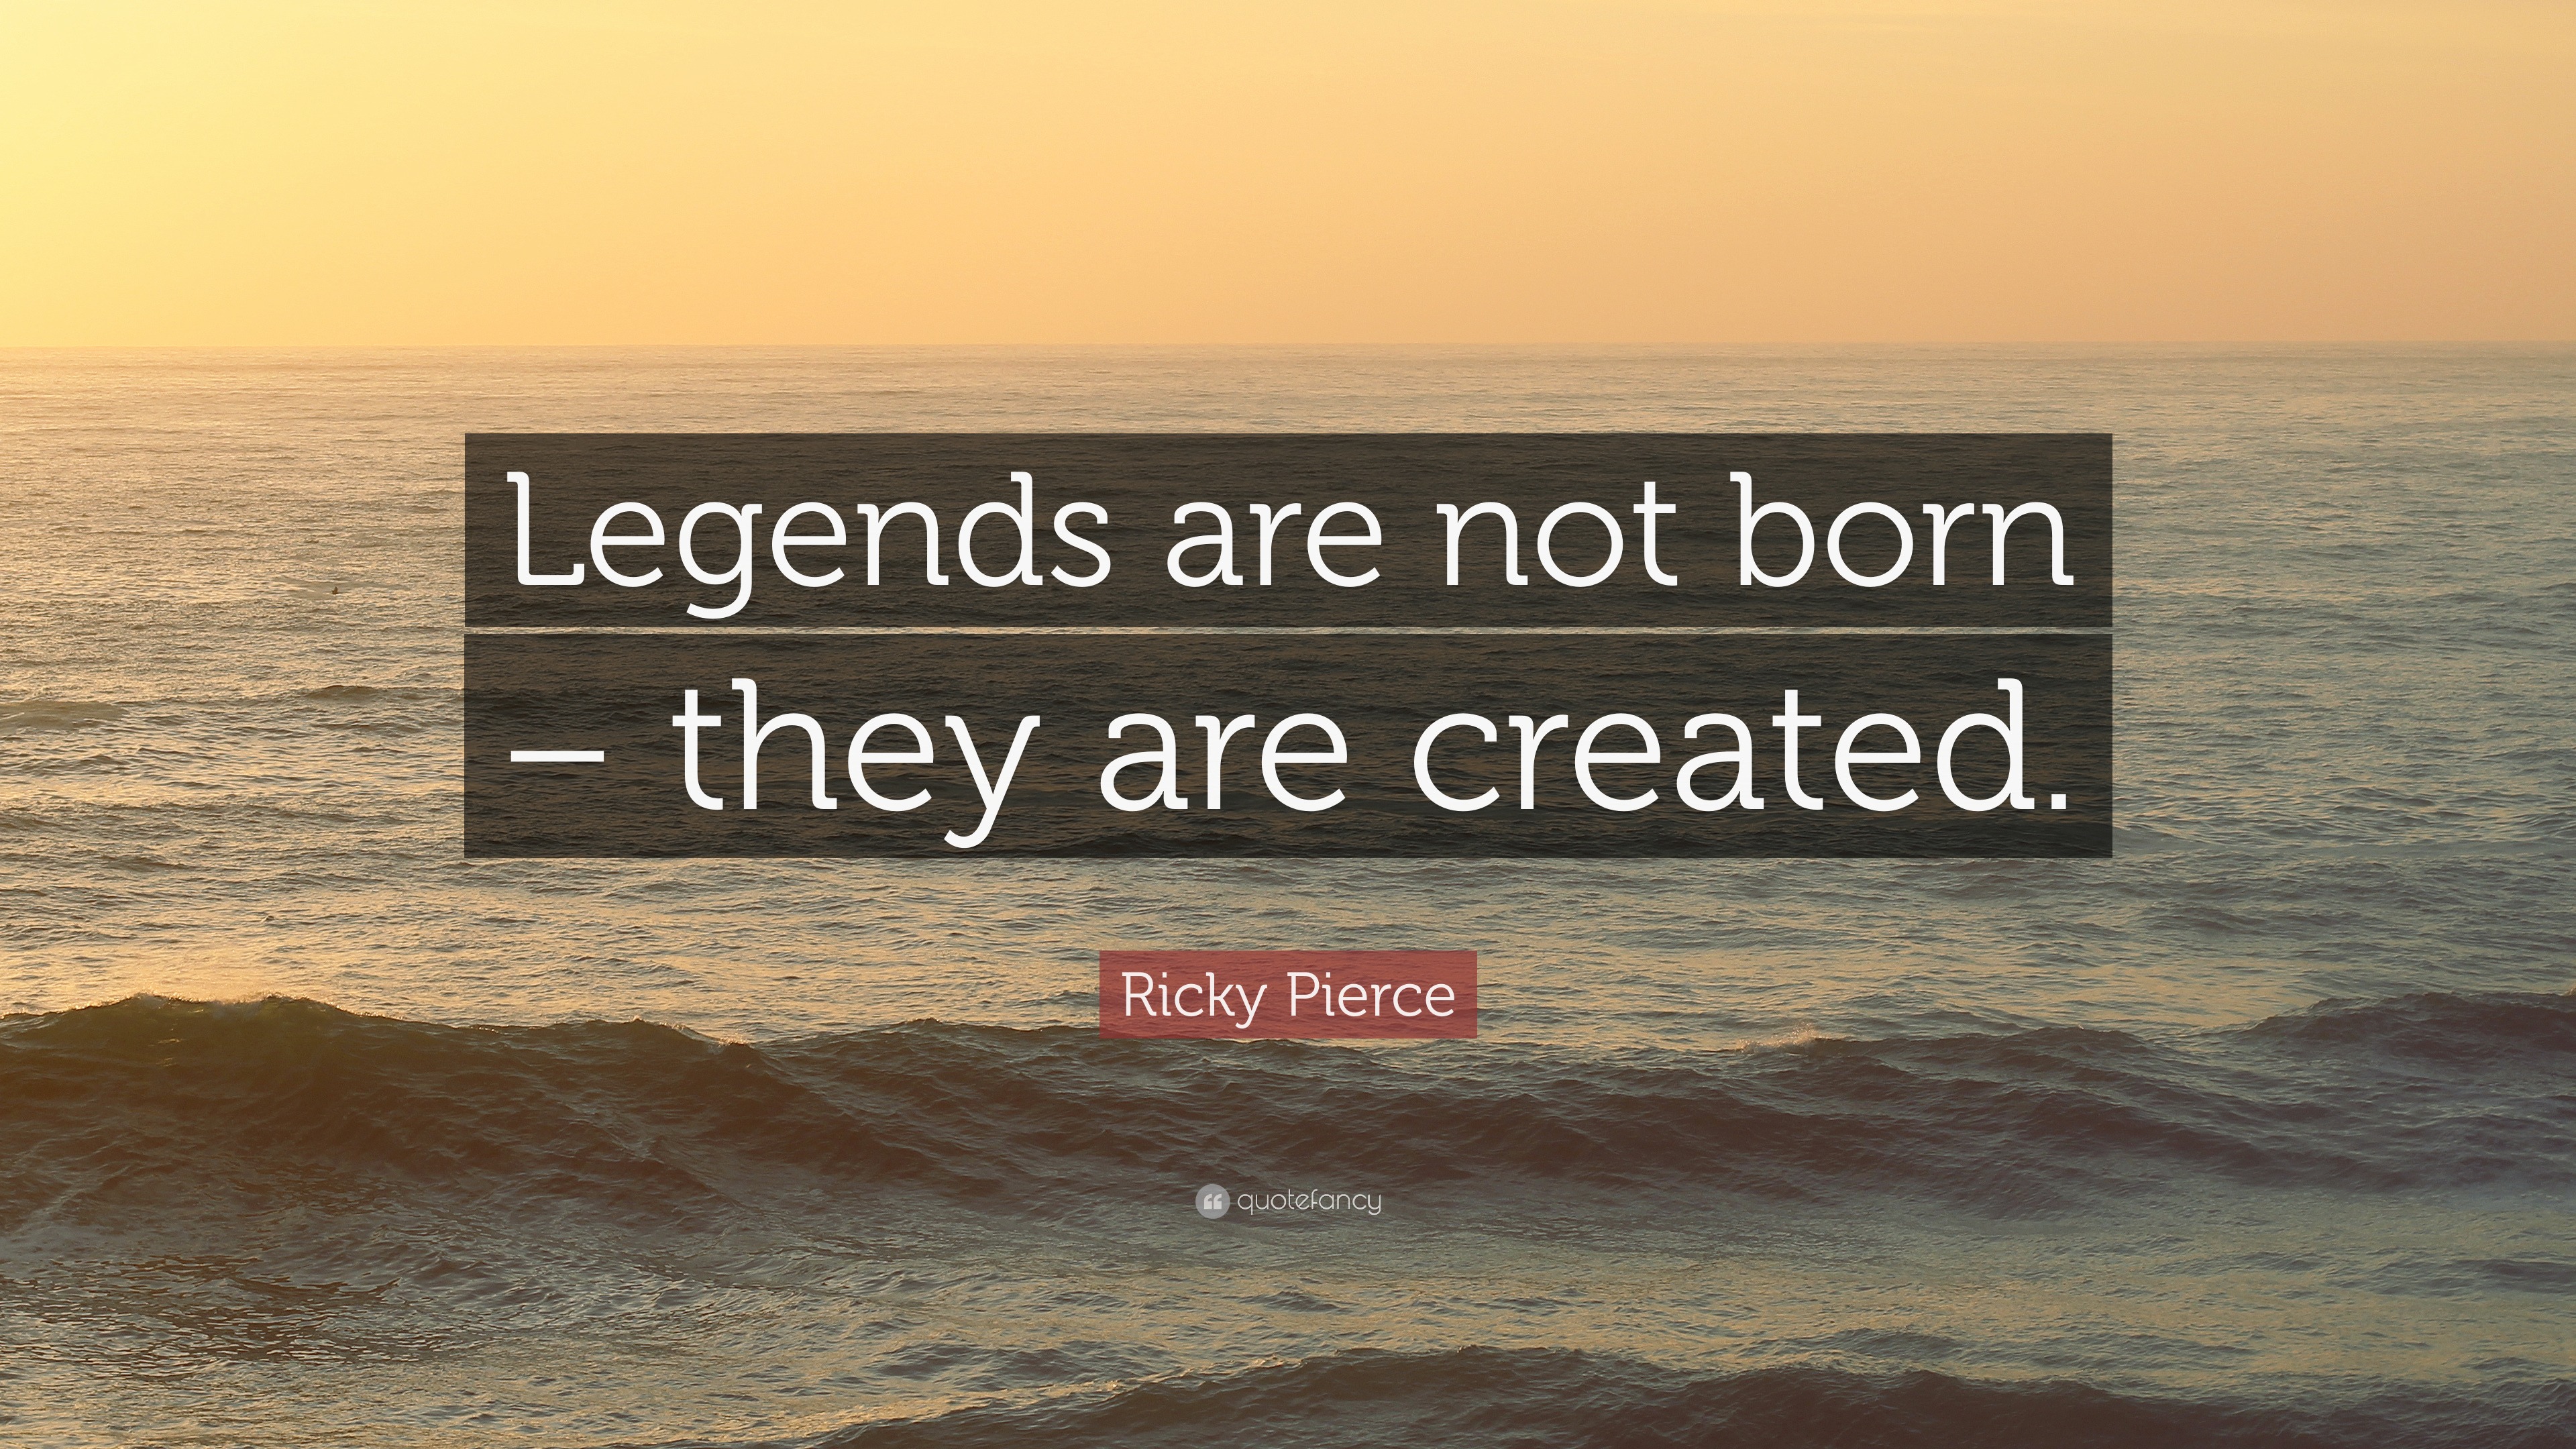 Legends are not born - they are created. 